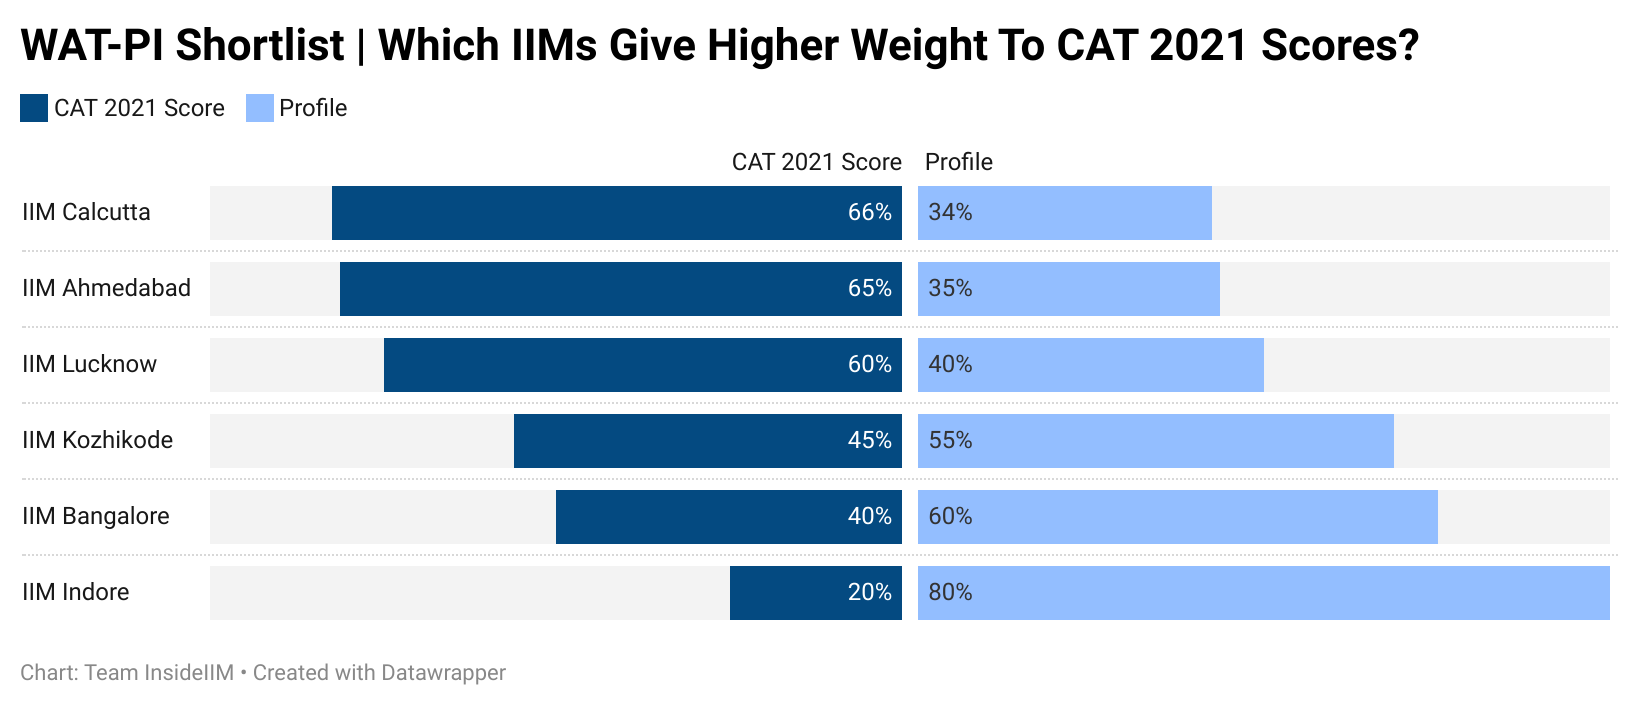 IIM Admission Policy 2021 - Which IIMs Give Higher Weight To CAT 2021 Scores?